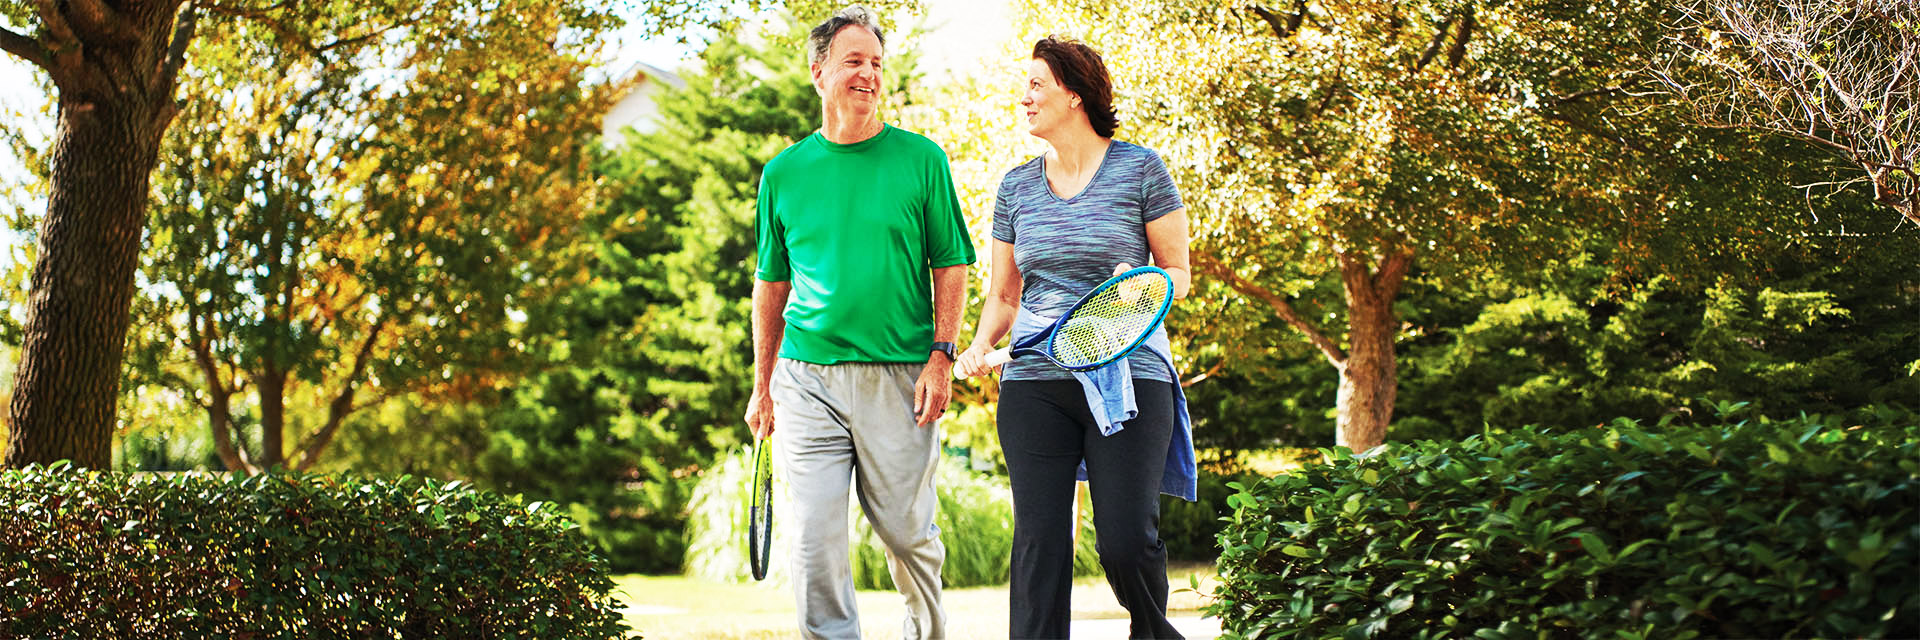 Couple walking outdoors holding tennis rackets